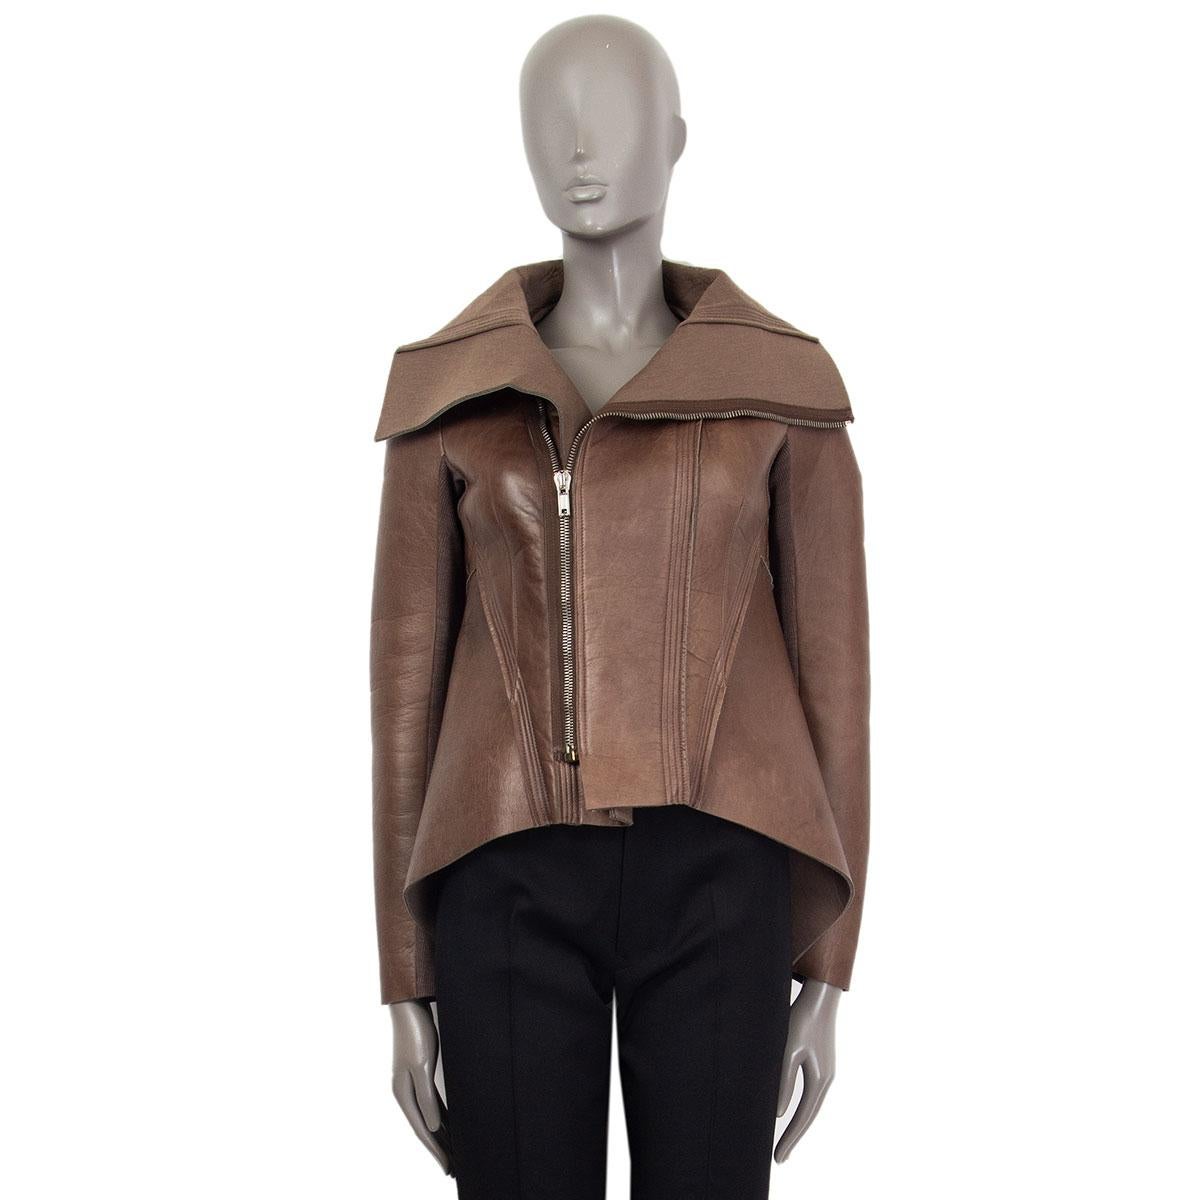 authentic Rick Owens Lilies high-low Naska biker jacket in taupe leather (100%). Closes with a zipper on the front. Unlined. Has been worn and is in excellent condition.

Tag Size
Missing Tag (S)
Size
S
Condition
Used
Shoulder Width
37cm